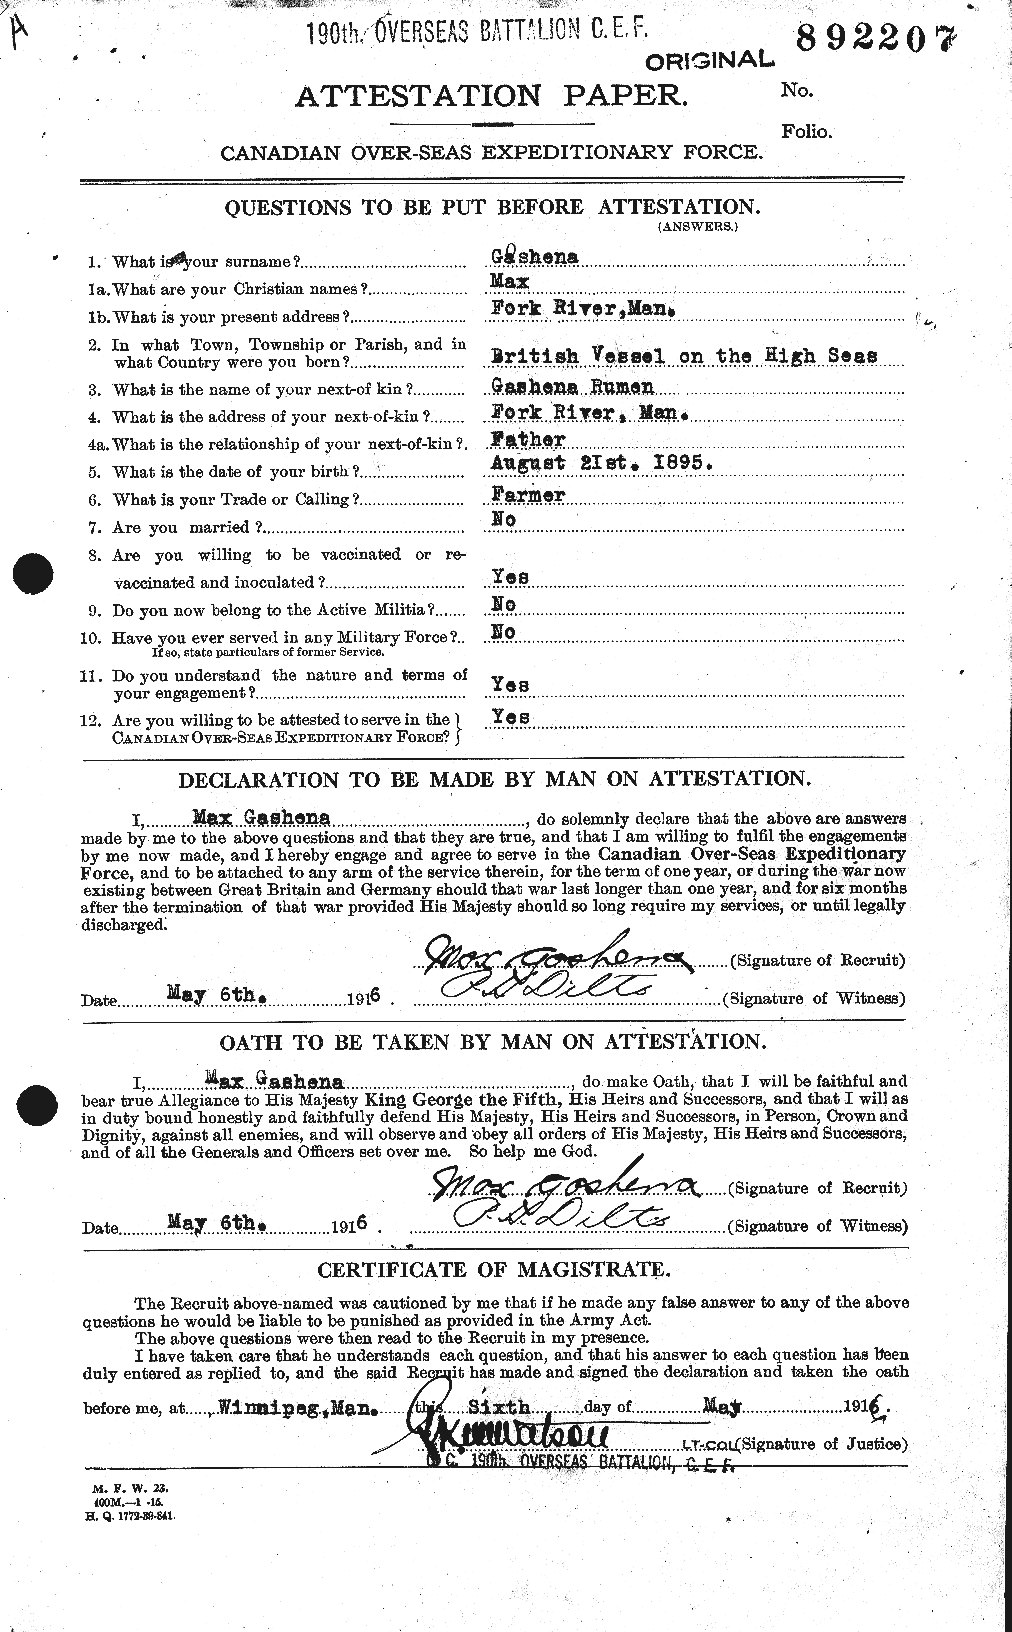 Personnel Records of the First World War - CEF 358741a